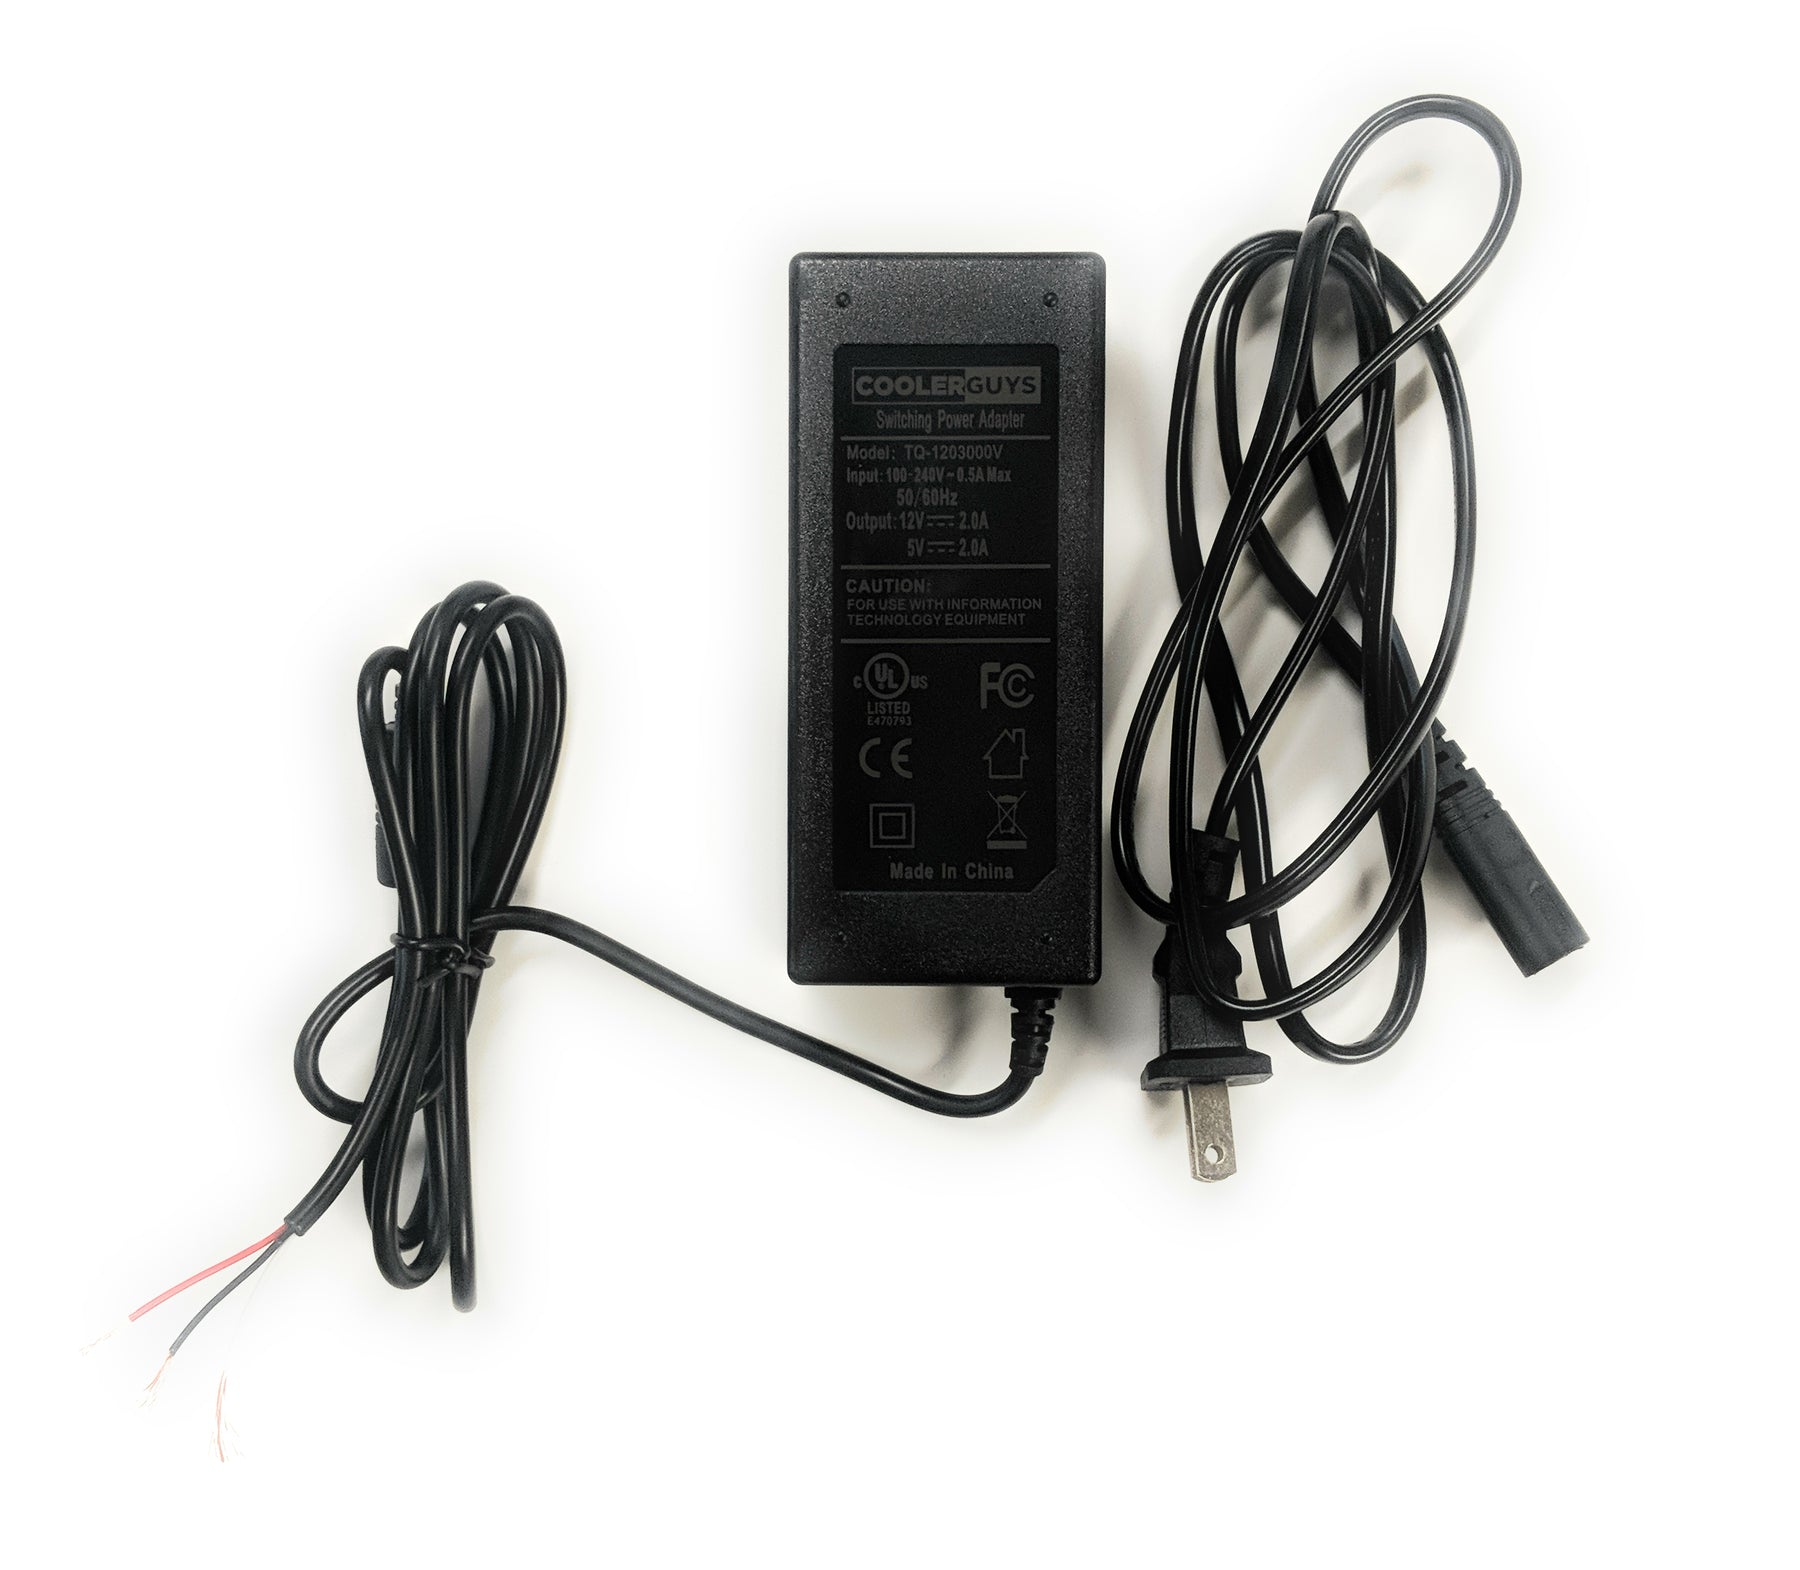 2A Power Supply 12v and 5v Bare Wire Output Leads-Coolerguys